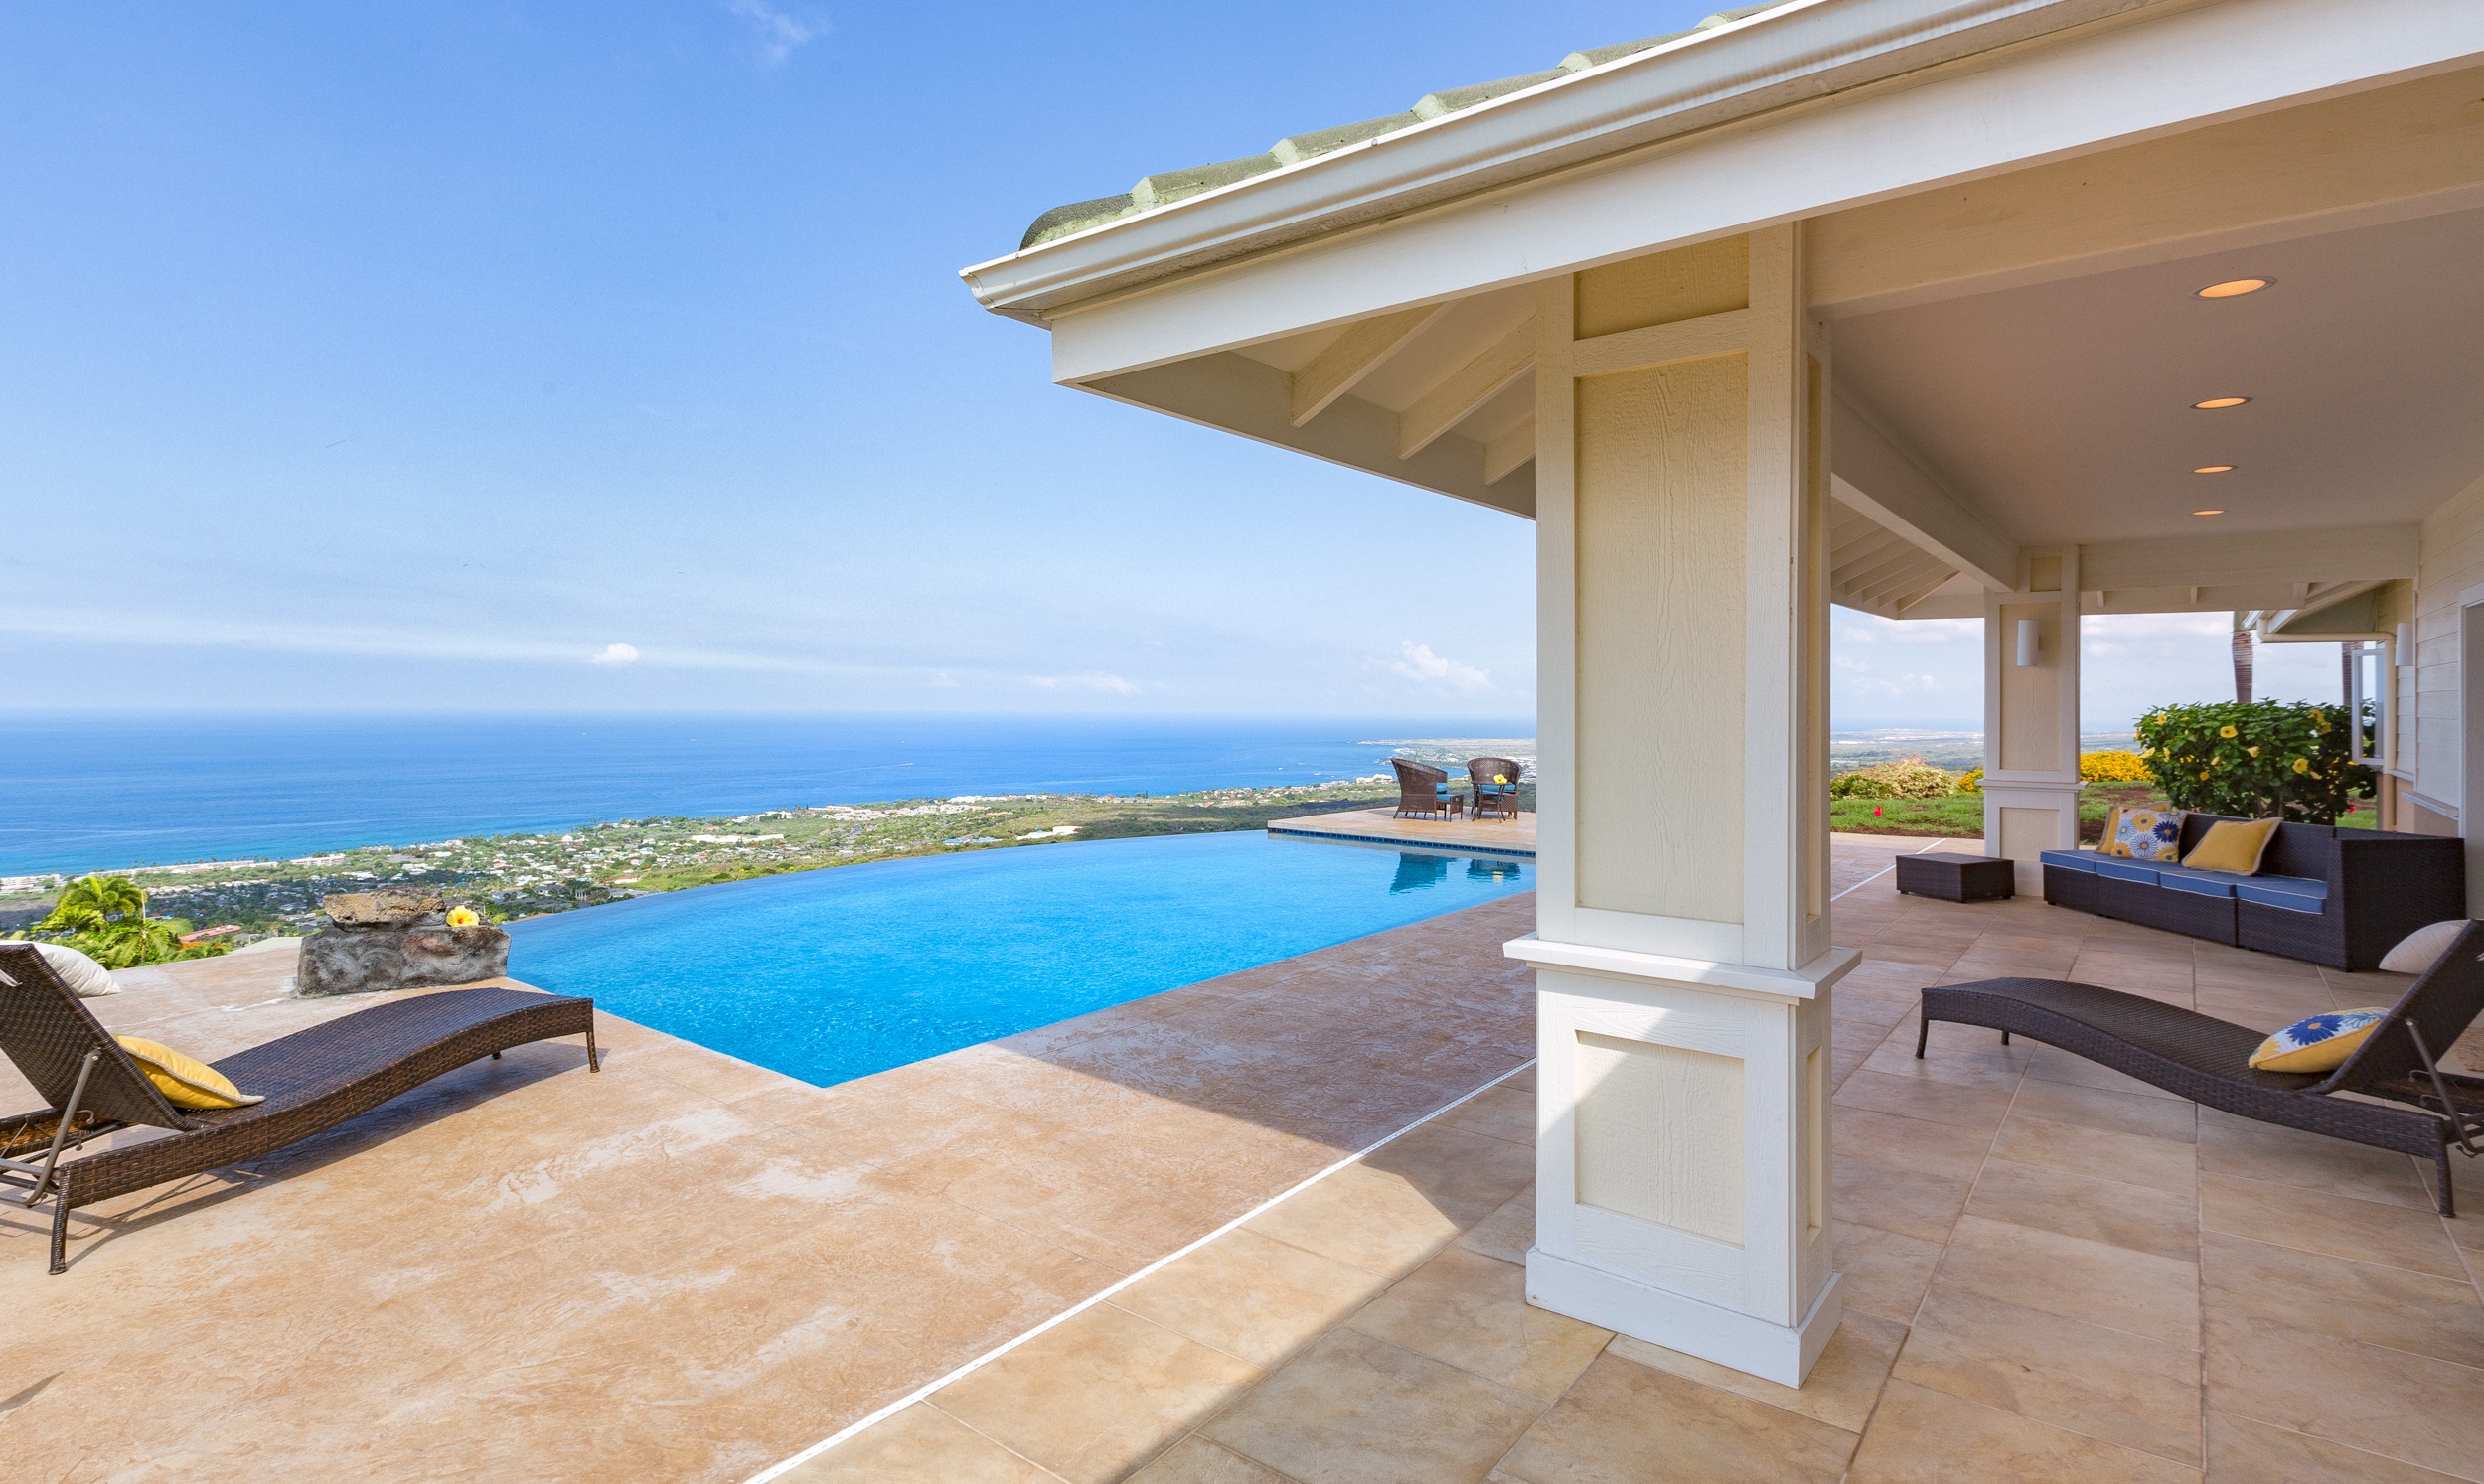 Stunning Ocean views from the private infinity pool